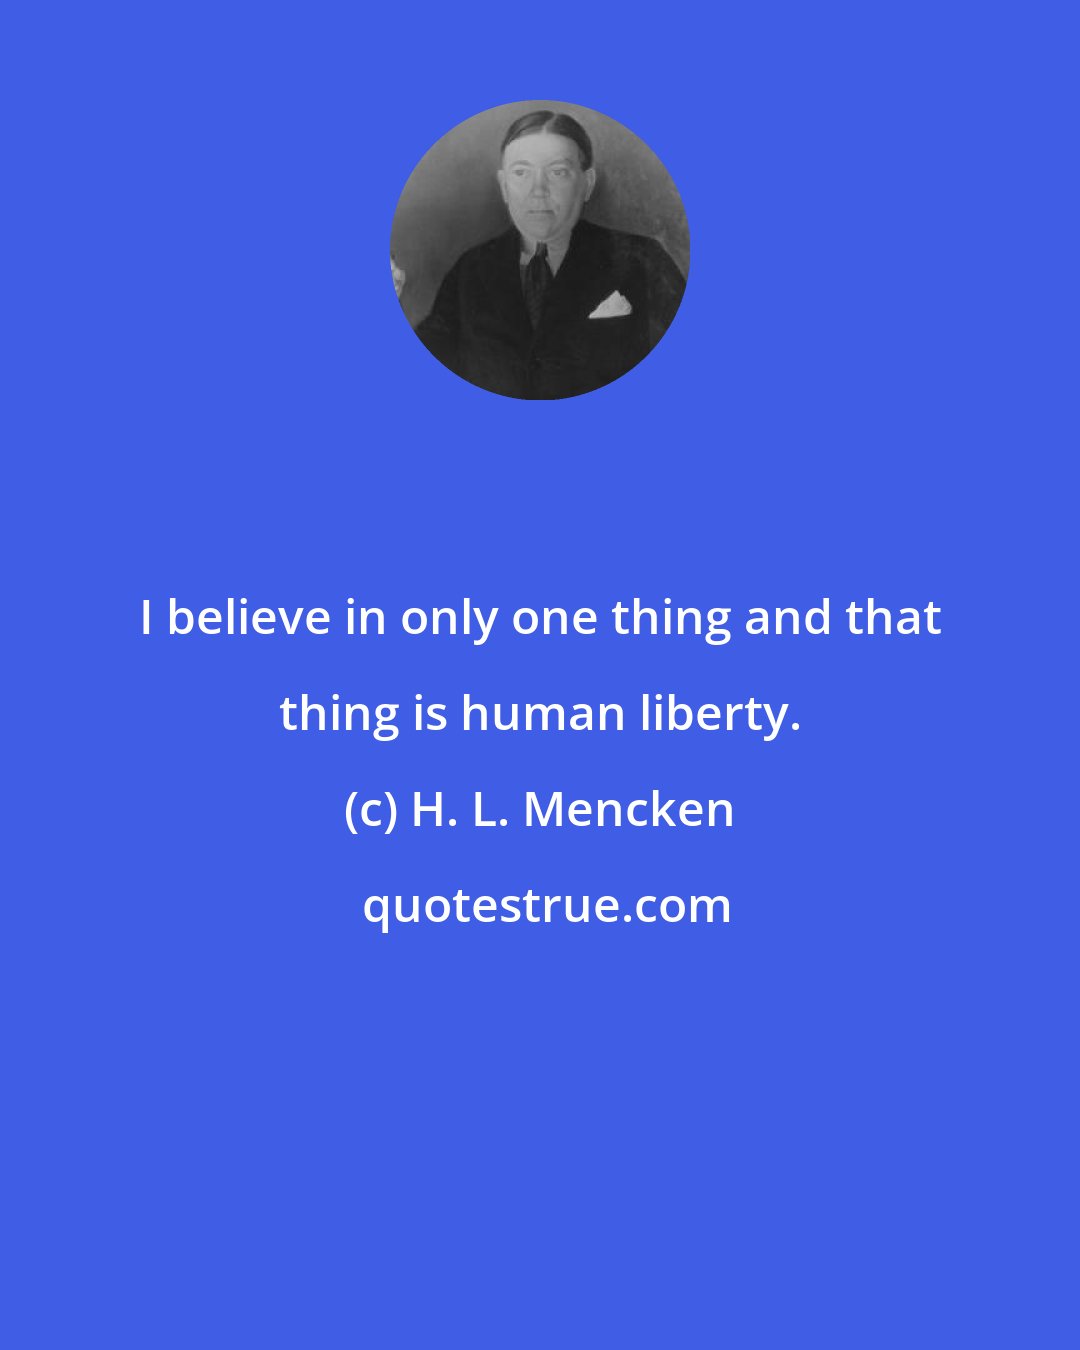 H. L. Mencken: I believe in only one thing and that thing is human liberty.